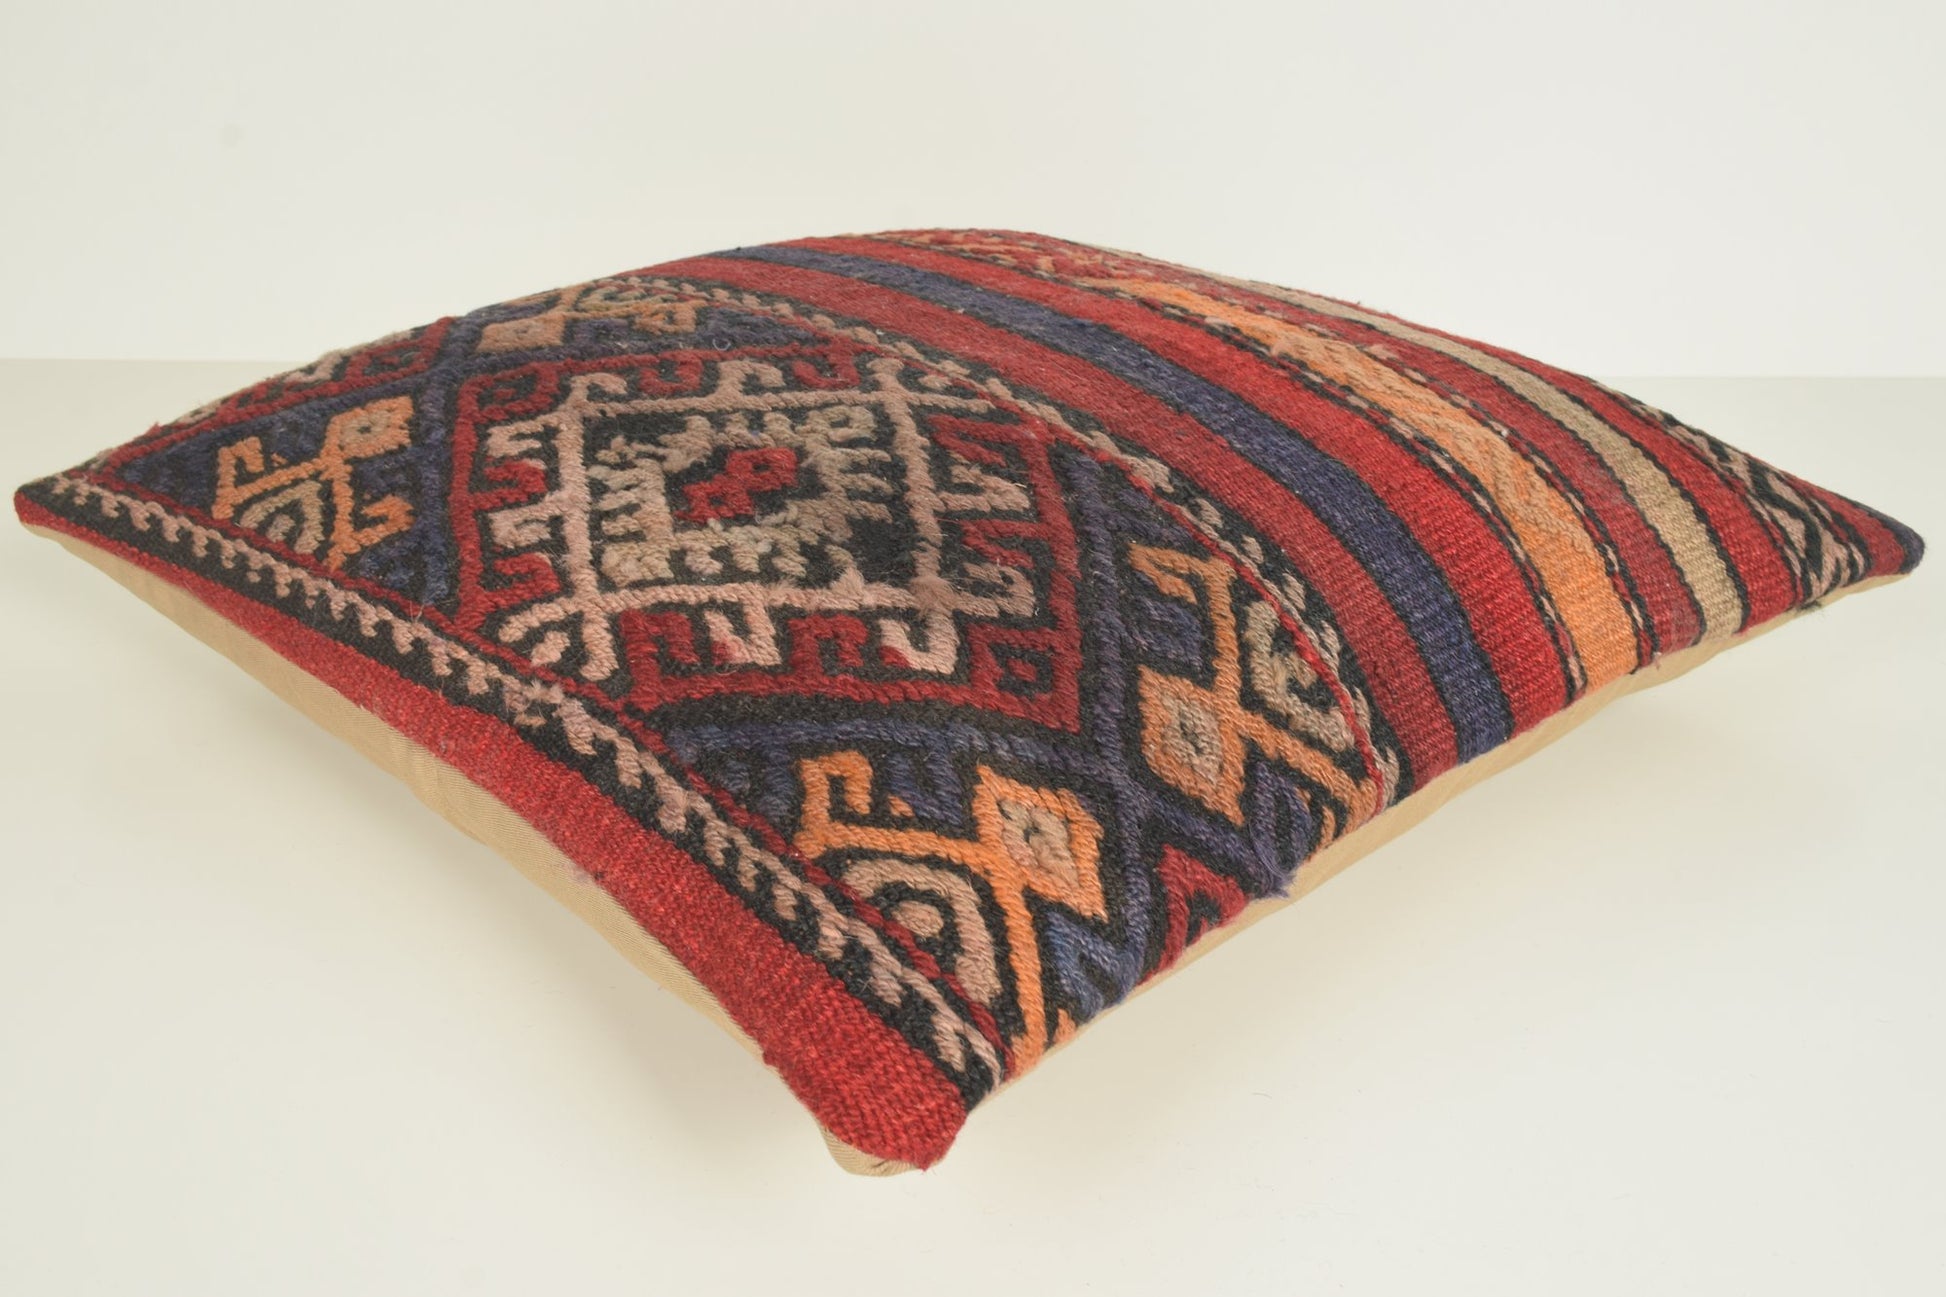 Used Kilim Rugs Pillow B01802 20x20 Economic Middle East Artist